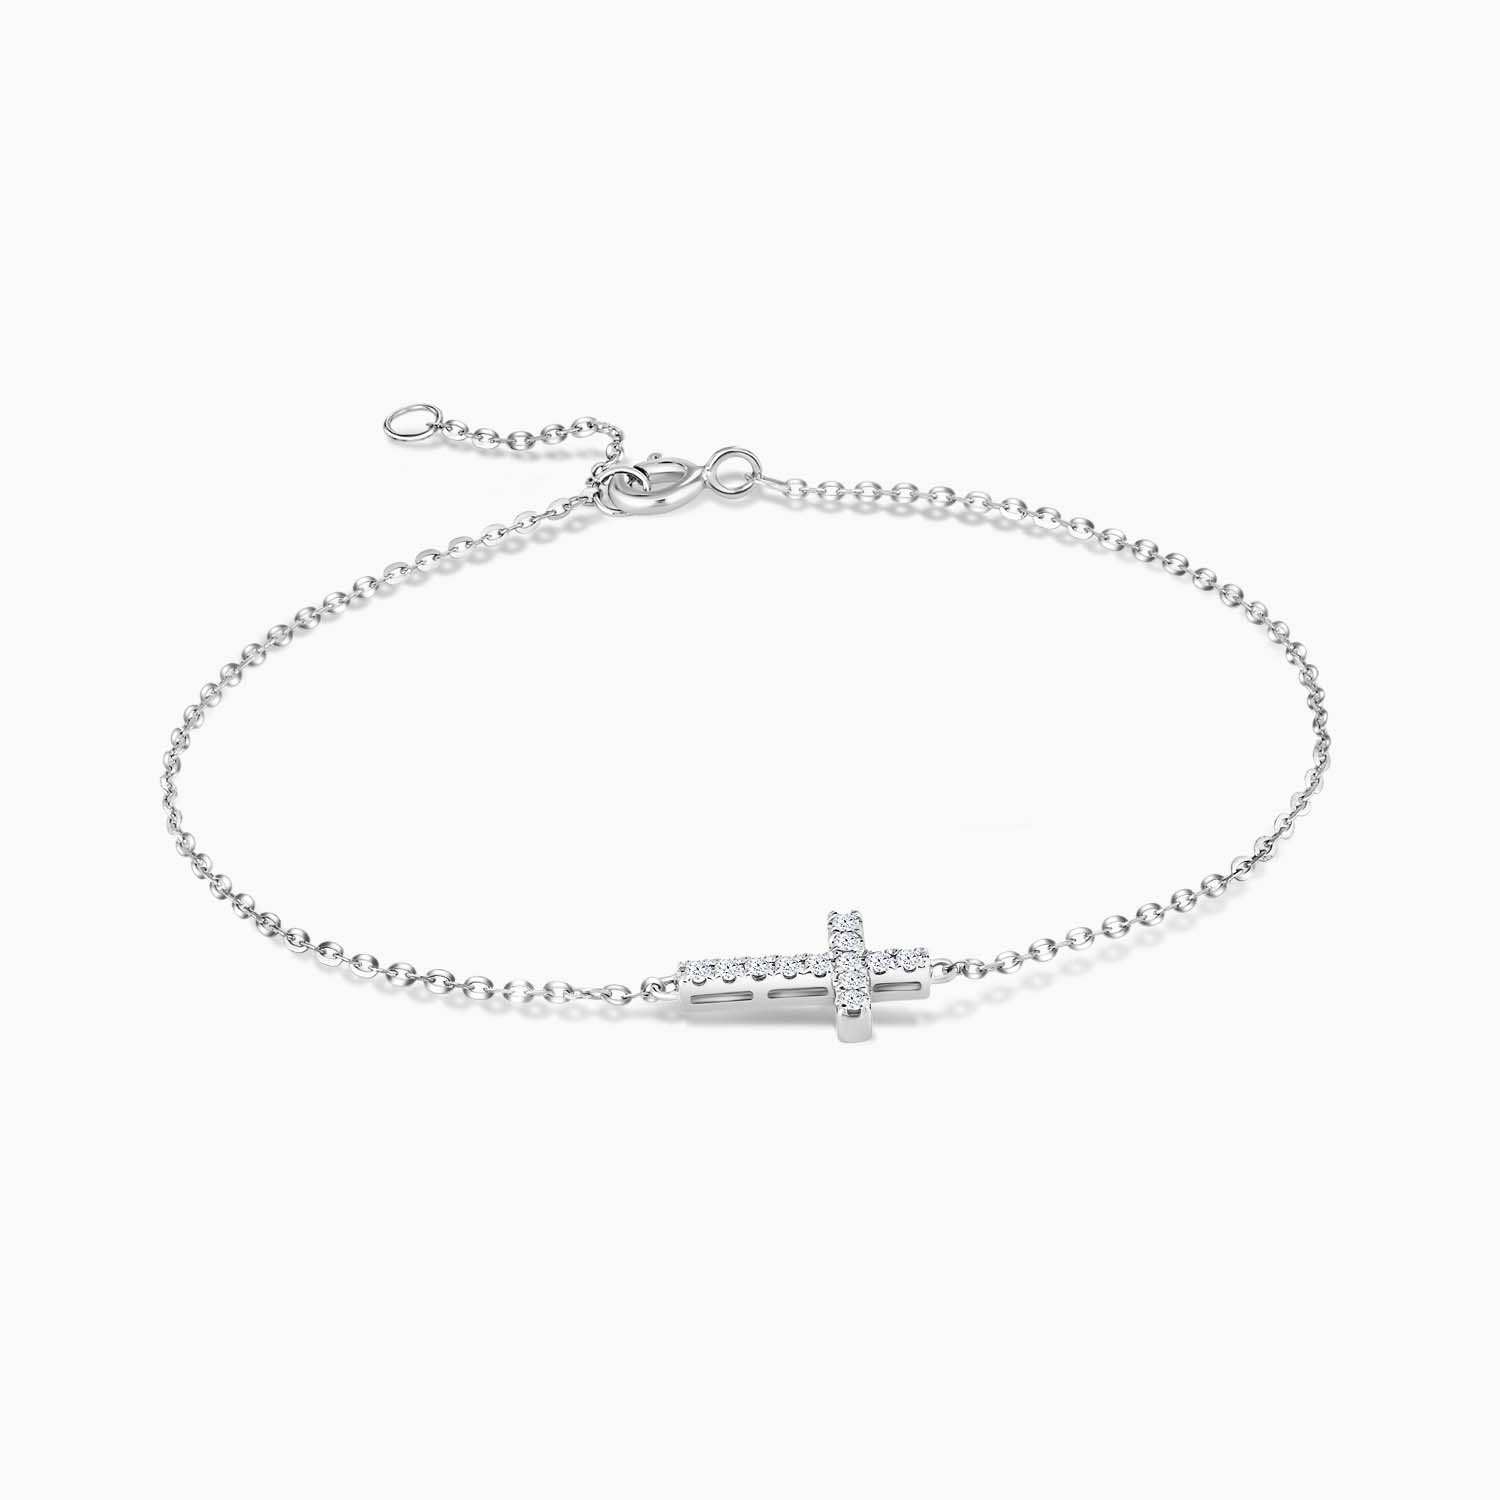 LVC BRACELETS CHARMES ELEGANCE CROSS DIAMOND designed with contemporary cross lined with 12 diamonds in 14k white gold